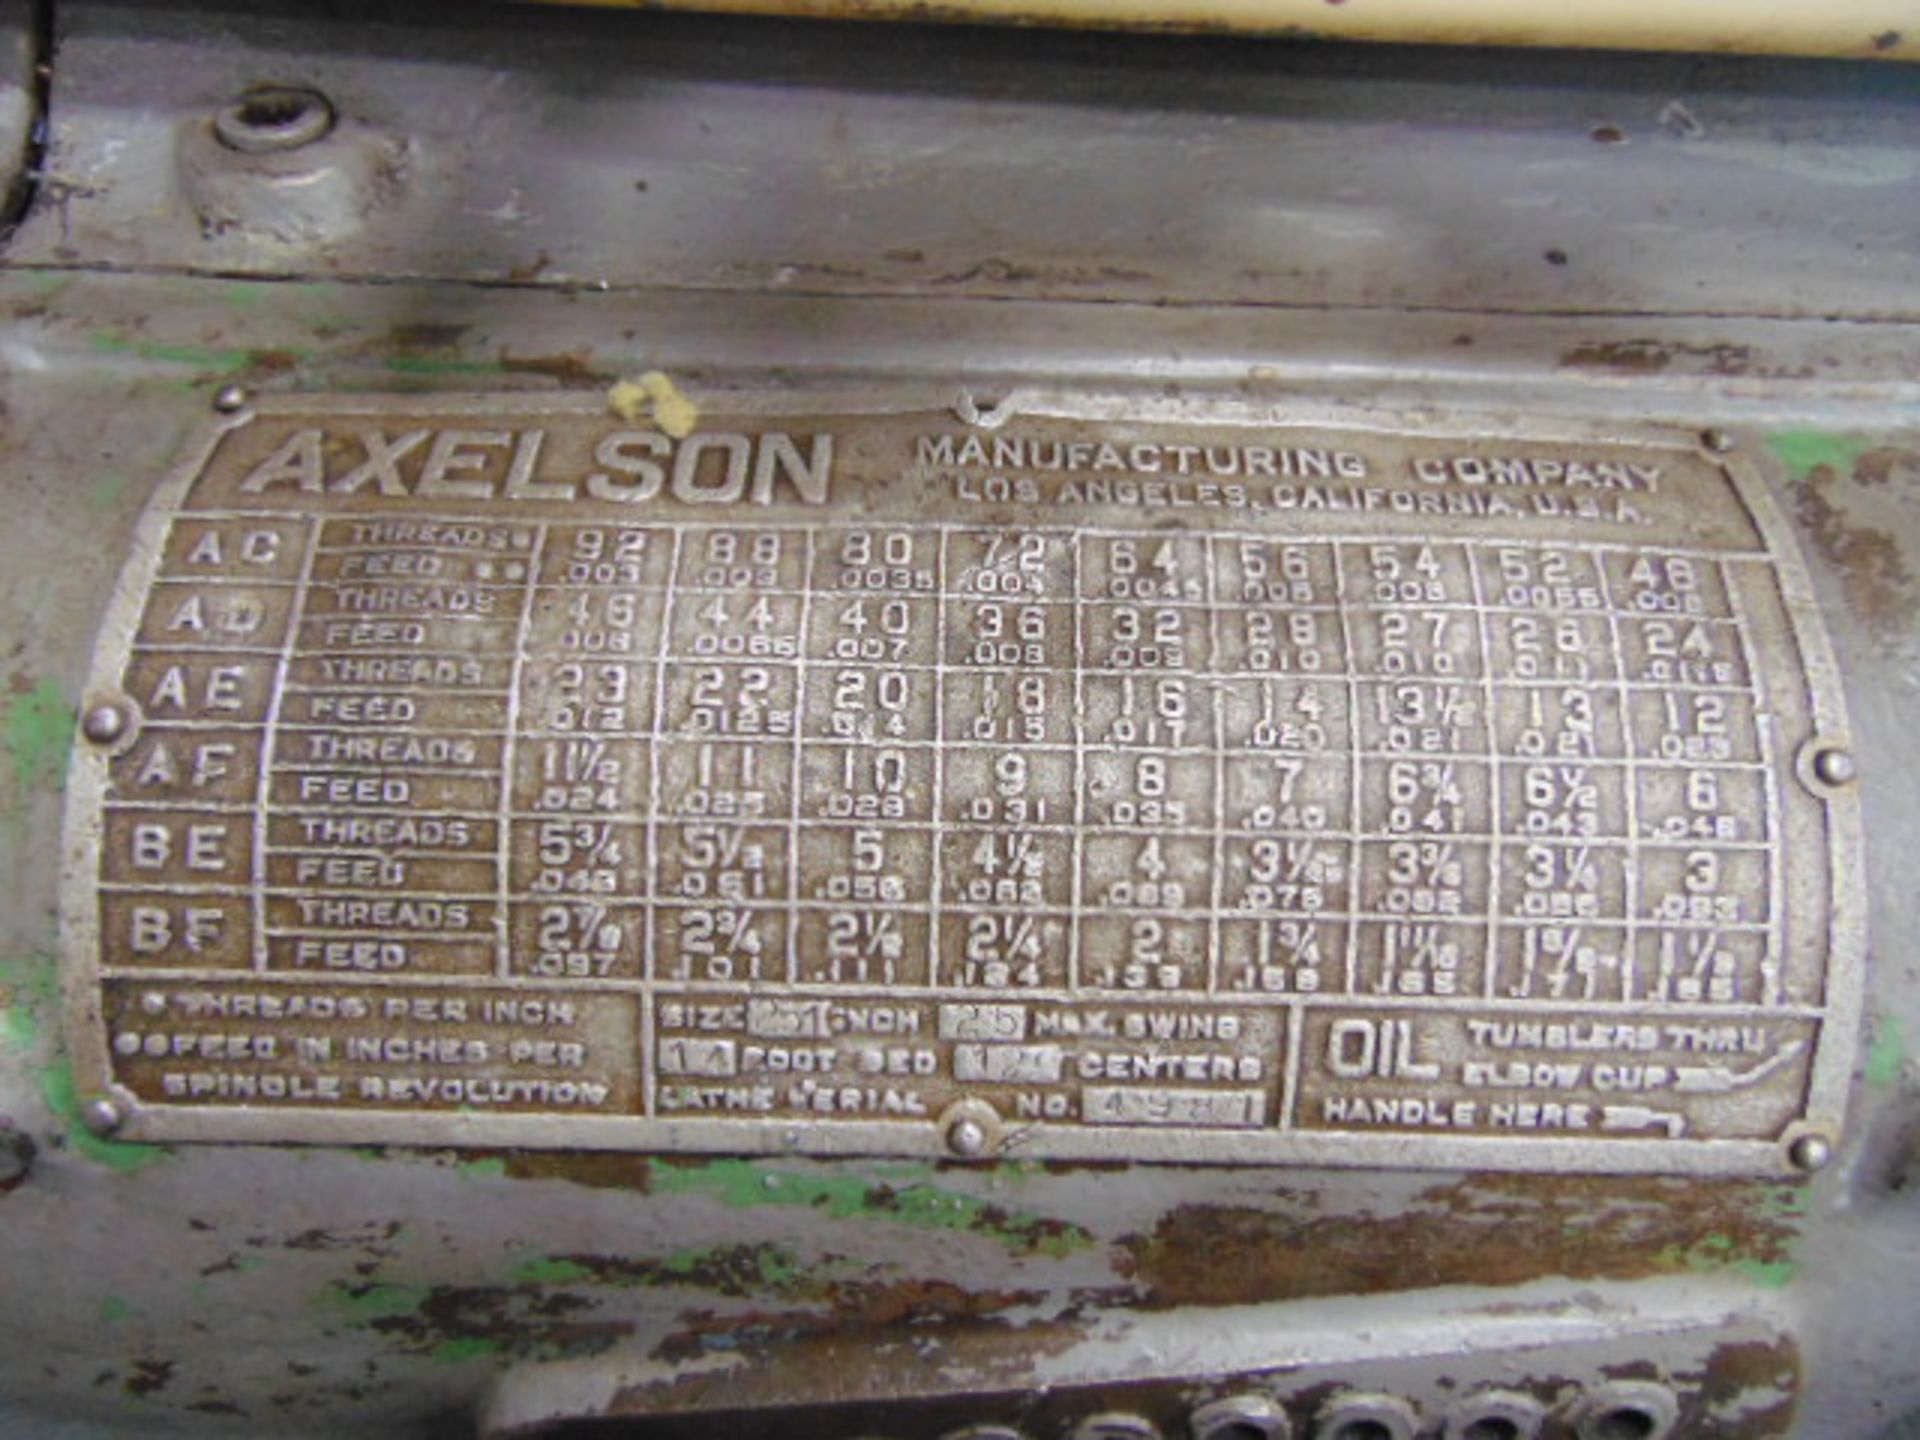 ENGINE LATHE, AXELSON SIZE 2516, 25” max. swing, 120” centers, spdl. spds: 9.5-961 RPM, 2-1/2” spdl. - Image 4 of 10